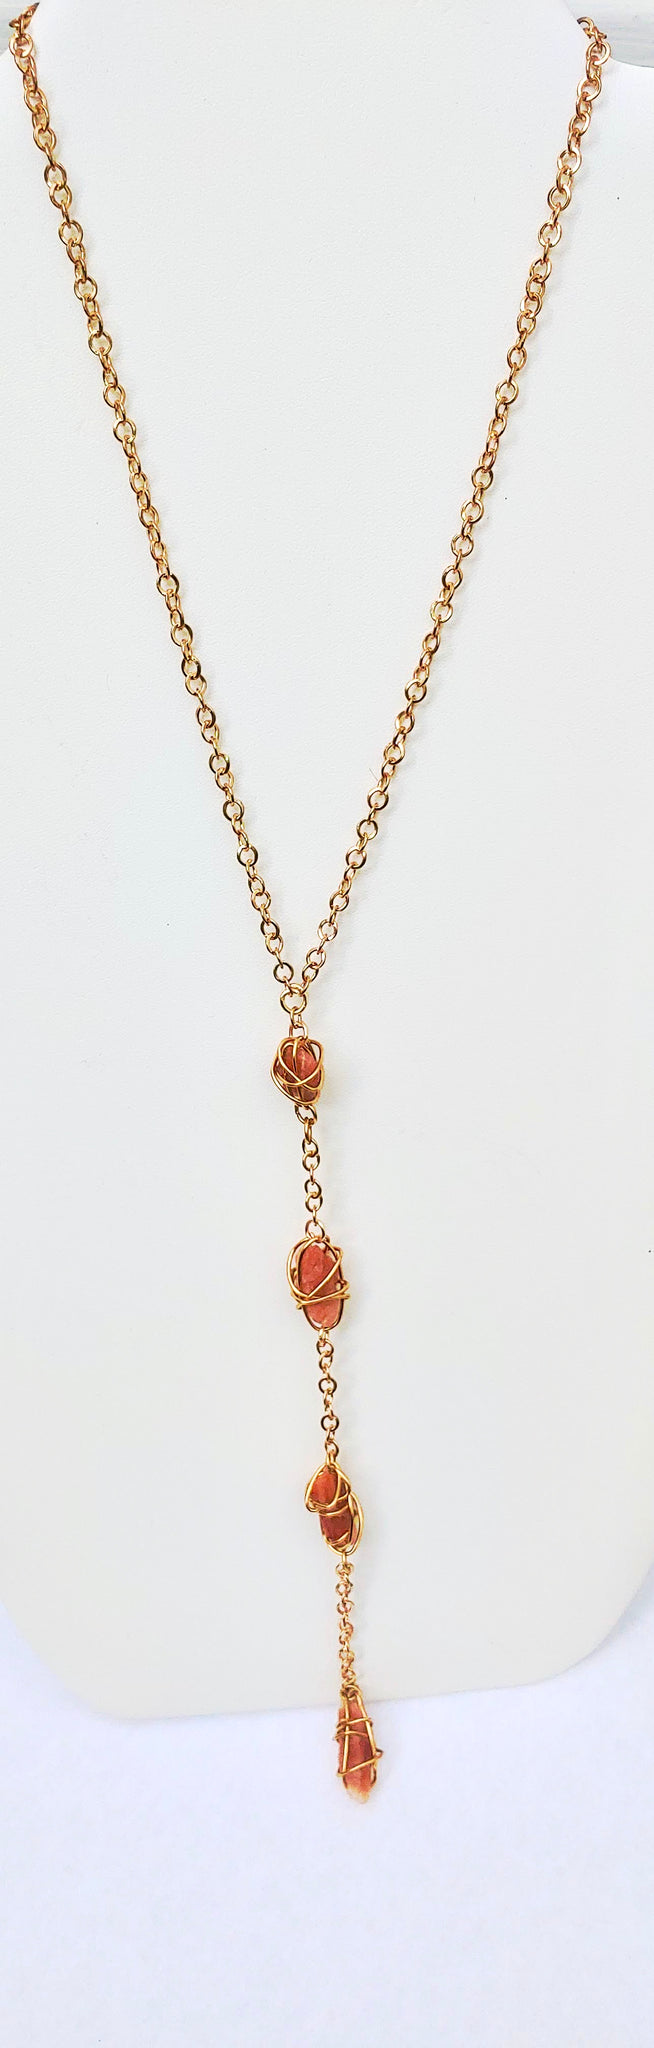 Long Necklace with sun stones wire wrapped in gold tone wire.  